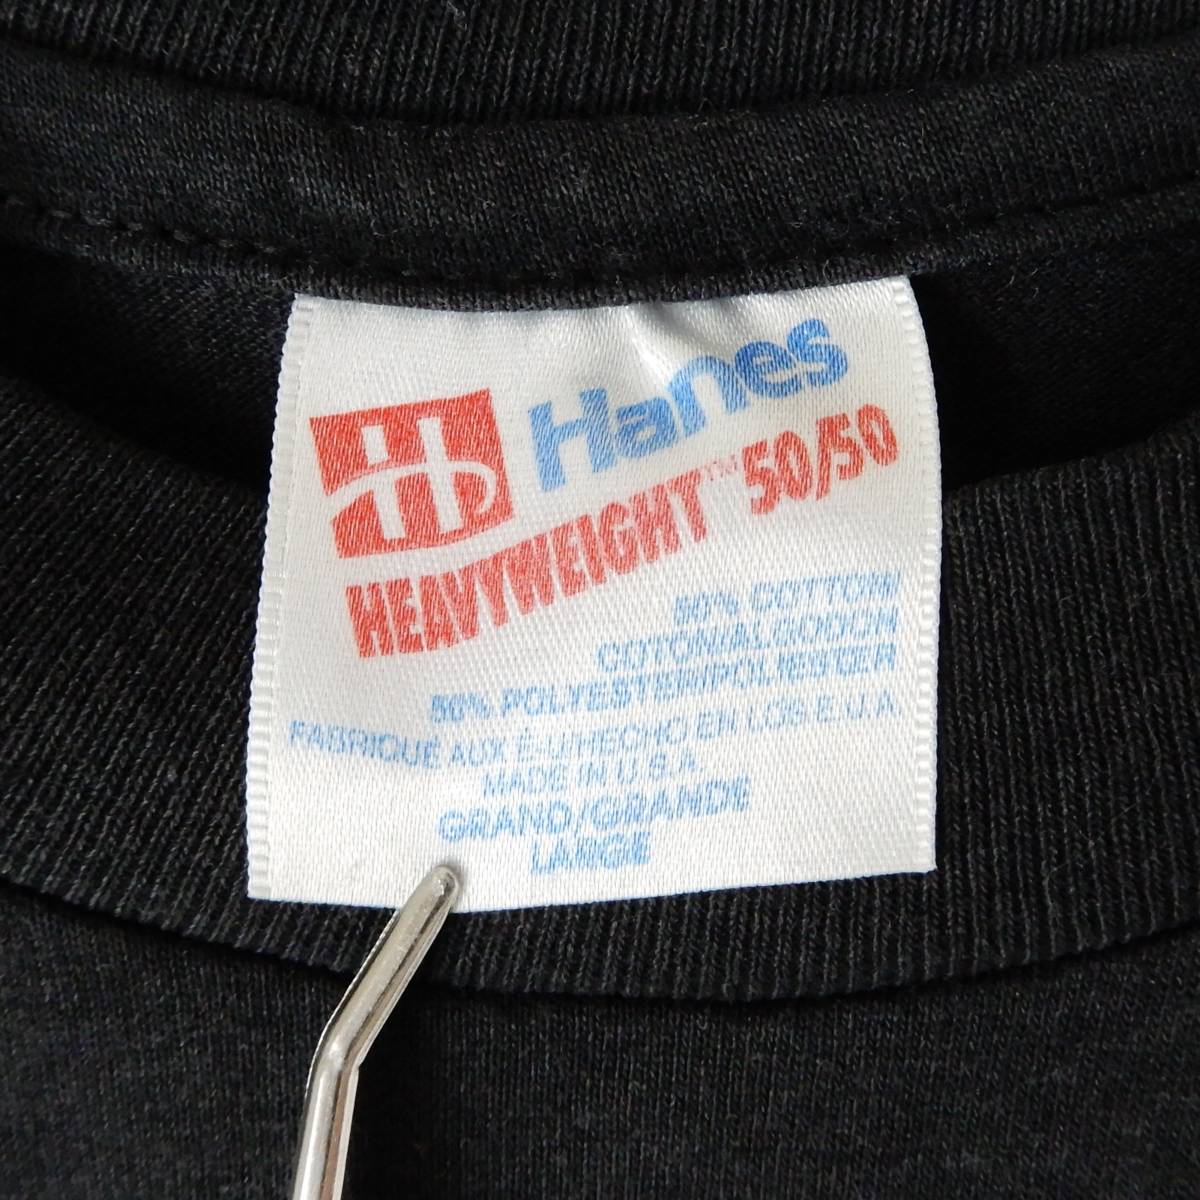 Hanes HEAVYWEIGHT T-Shirts 1990s LARGE T153 Made in USA ヘインズ ヘビーウェイト 1990年代 アメリカ製_画像10